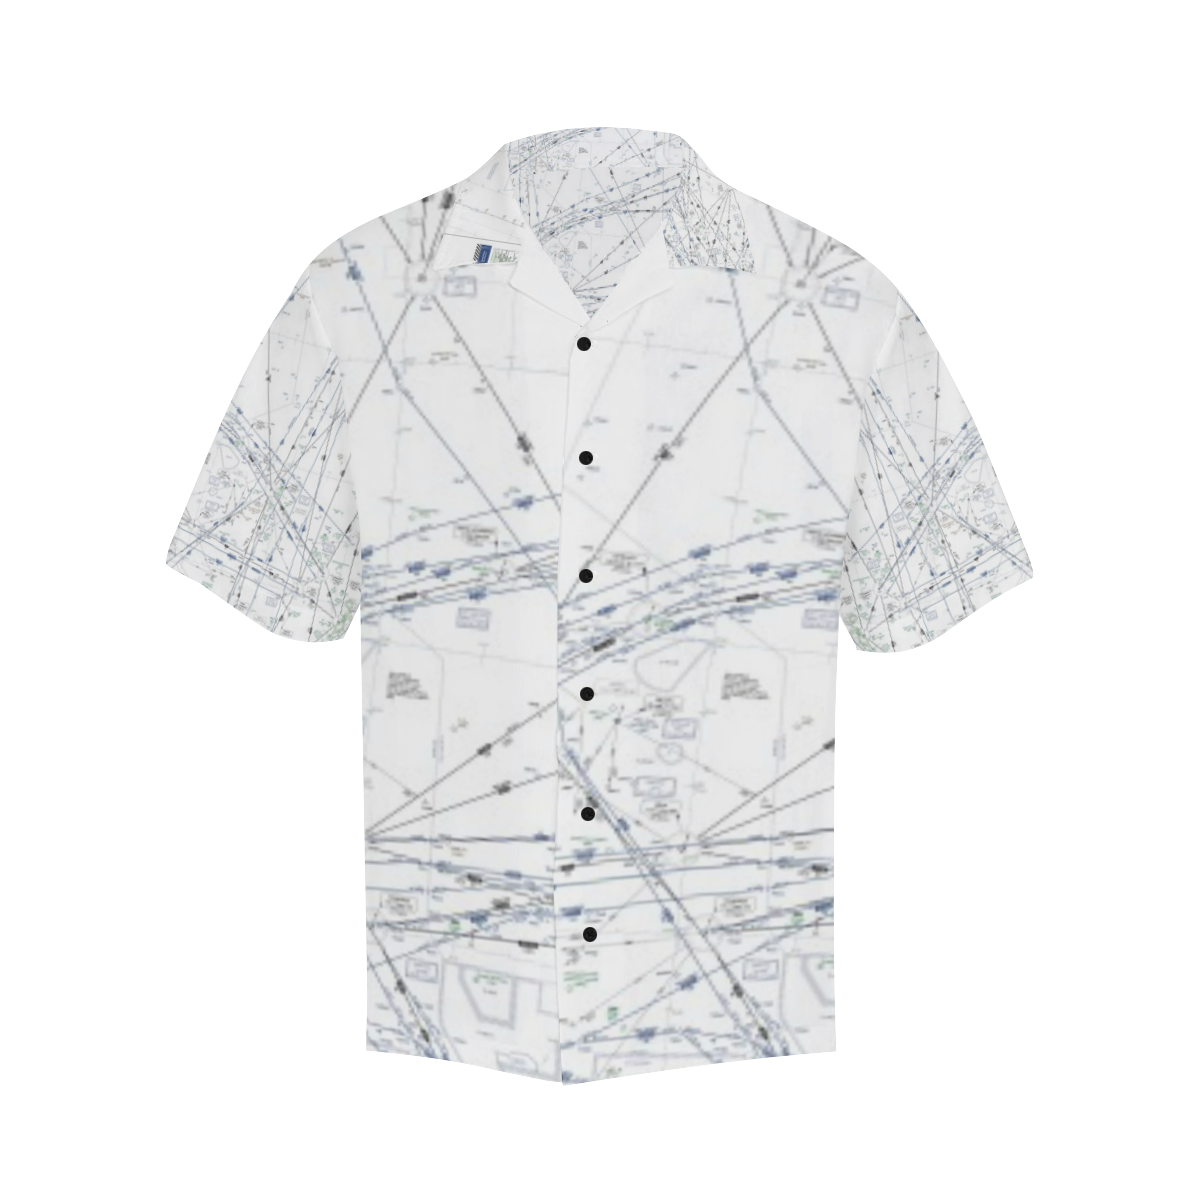 Front image of white PACIFIC ENROUTE HAWAIIAN CHART HAWAIIAN SHIRT. It is a comfortable shirt in summers